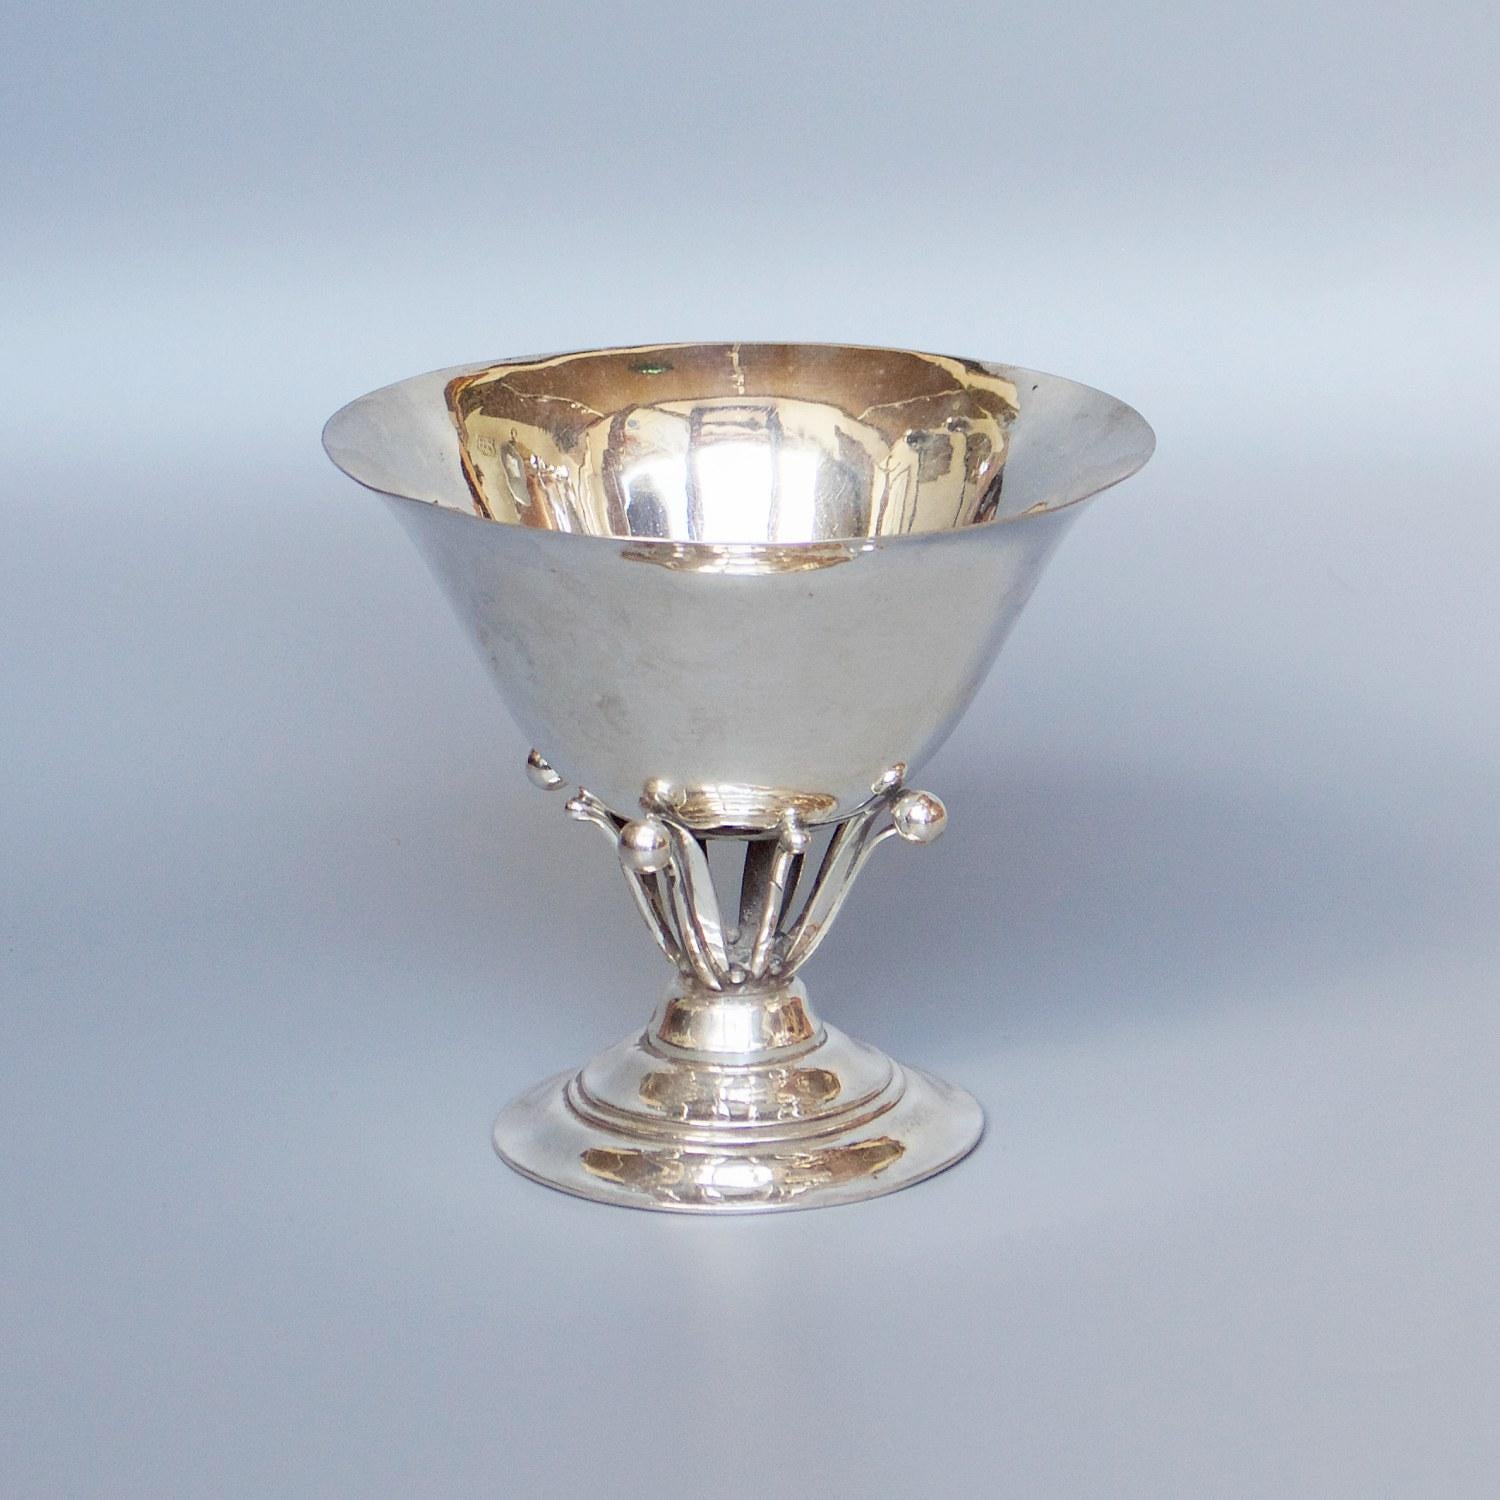 A Georg Jensen sterling silver, footed Tazza bowl designed by Johan Rohde. Marked Georg Jensen. 

Dimensions: H 12.5cm, D 14.5cm

Origin: Danish

Date: 1925-1932

Item number: 288207.